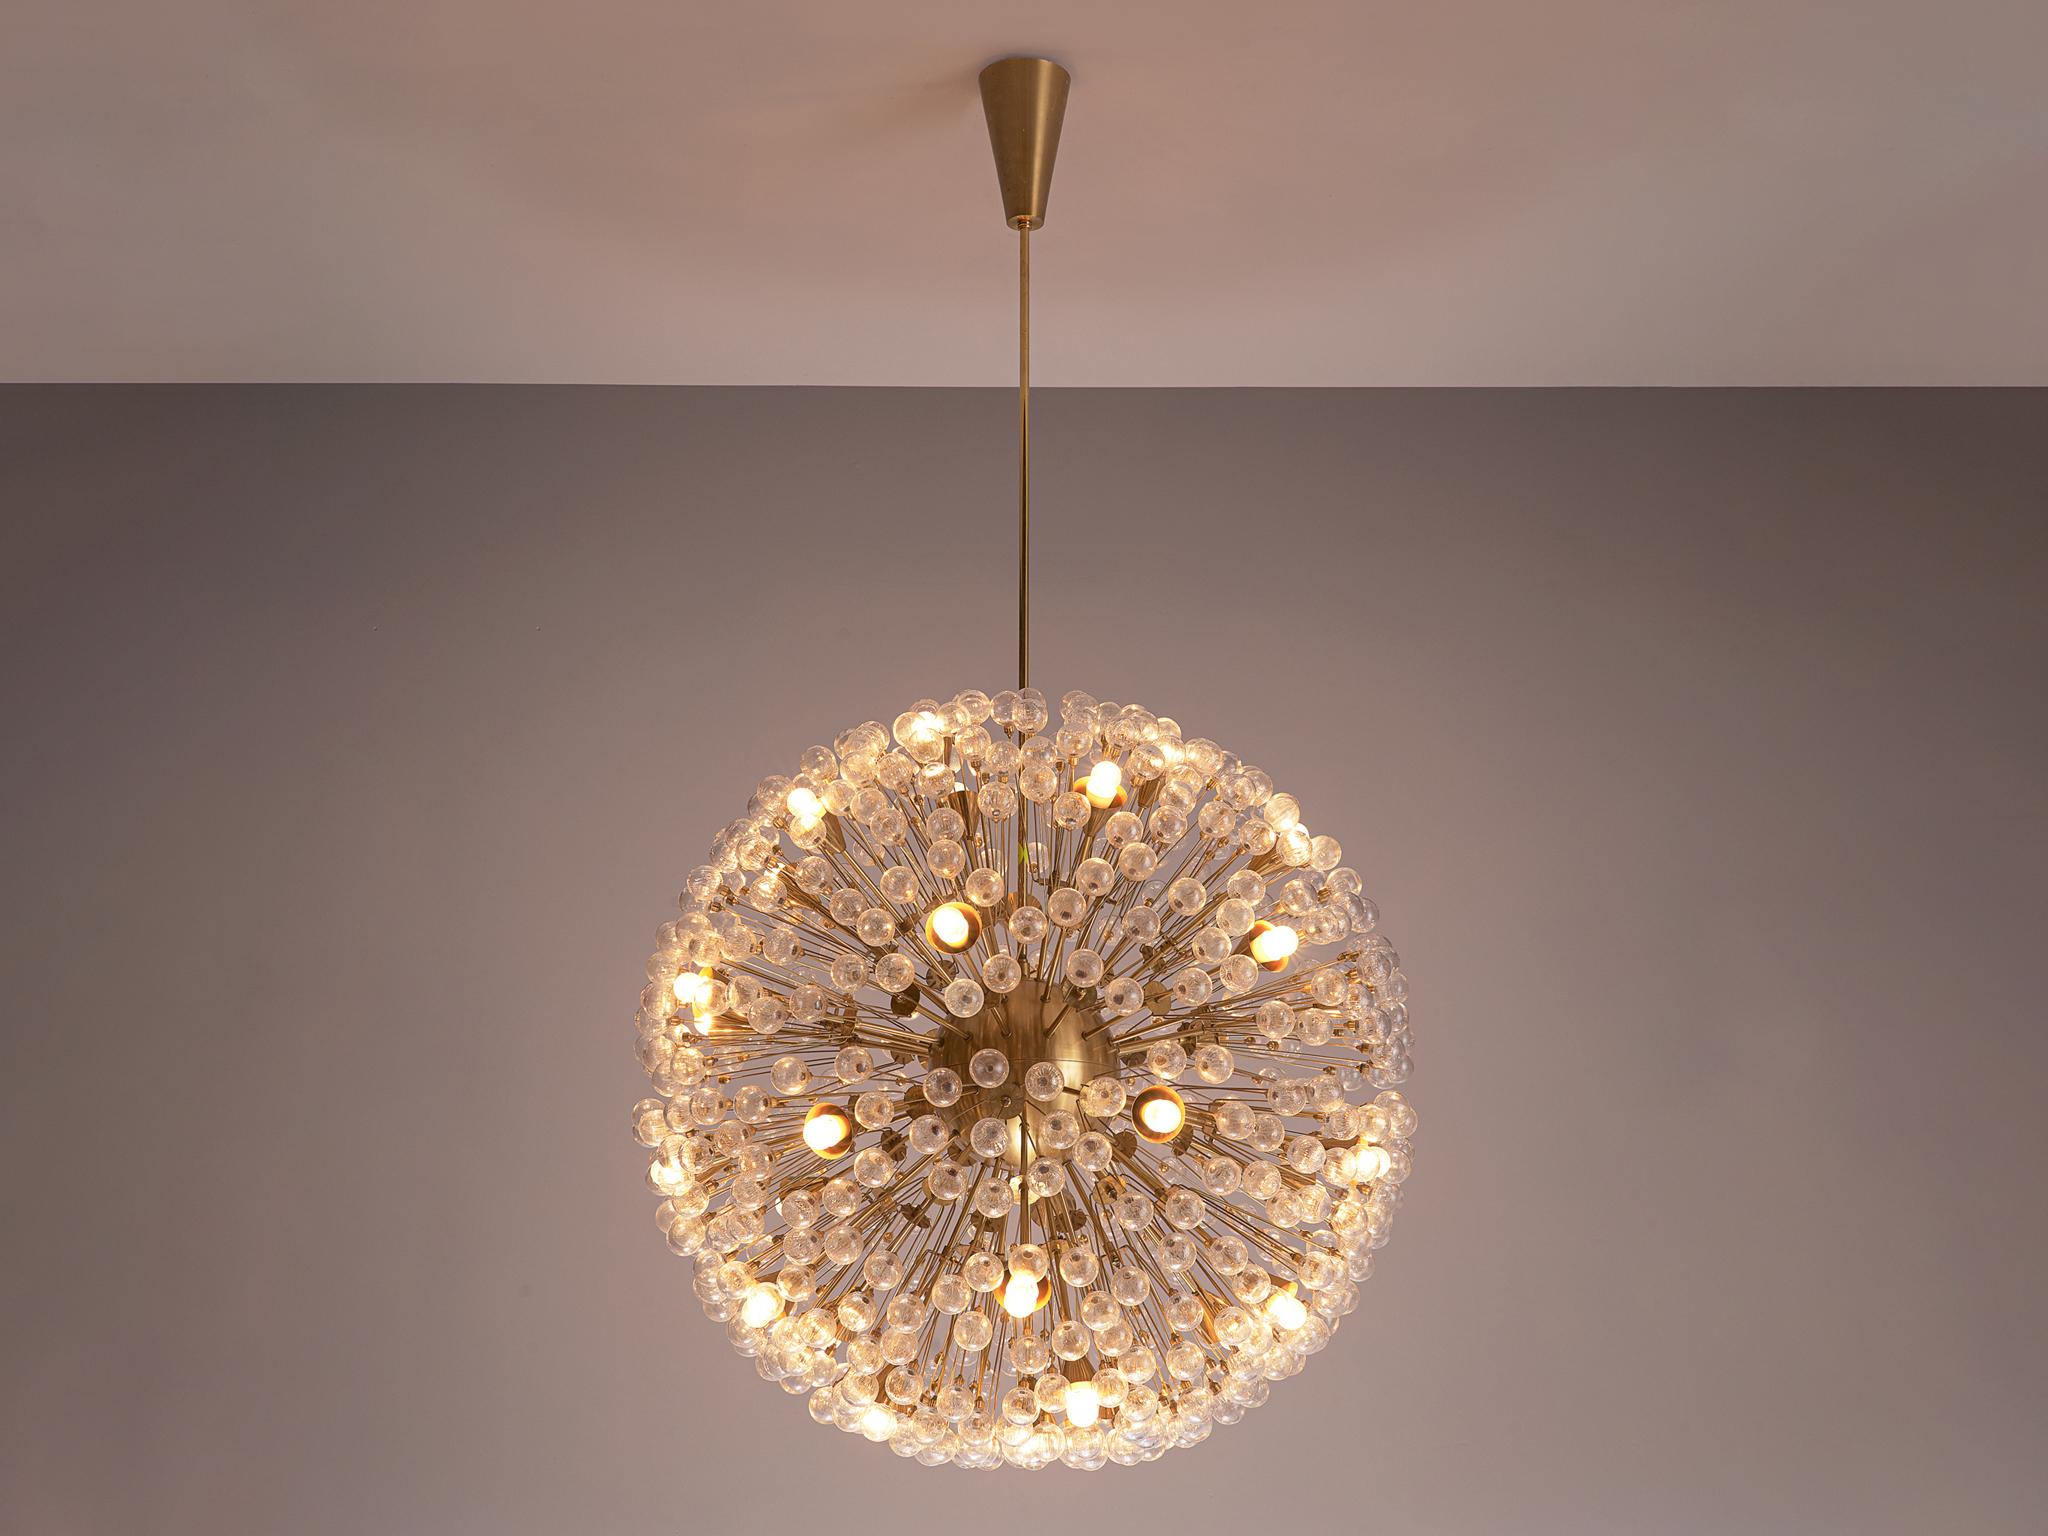 'Sputnik' chandeliers, brass, glass, Austria, 1960s

Round like a ball this 'Sputnik' chandelier consists out of a center sphere from which many rods with glass spheres at their ends are held. The small spheres are made out of structured glass and